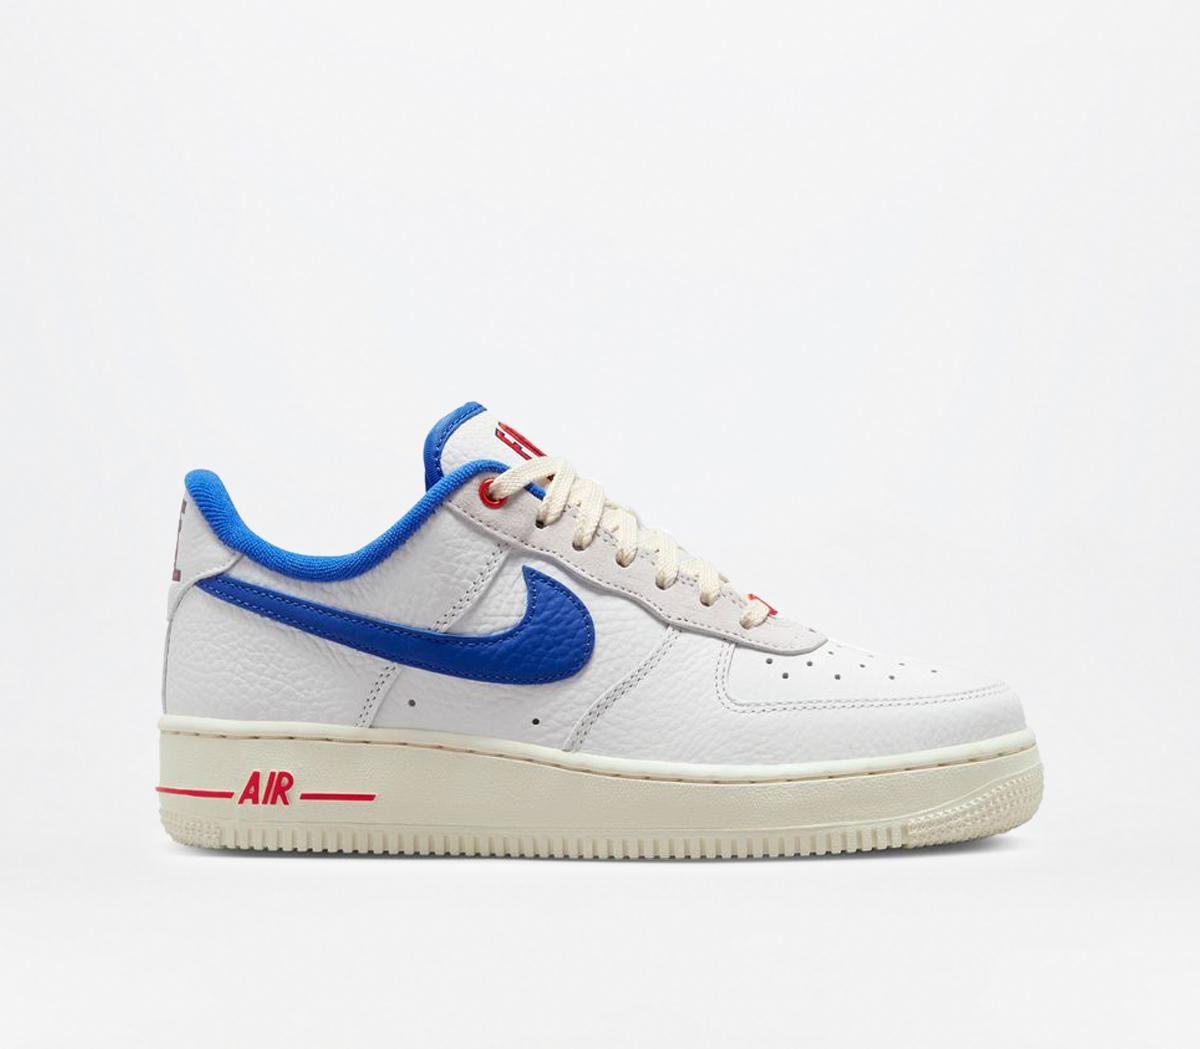 NikeAir Force 1 07 Trainers Summit White Hyper Royal Picante Red Obsidian Coco